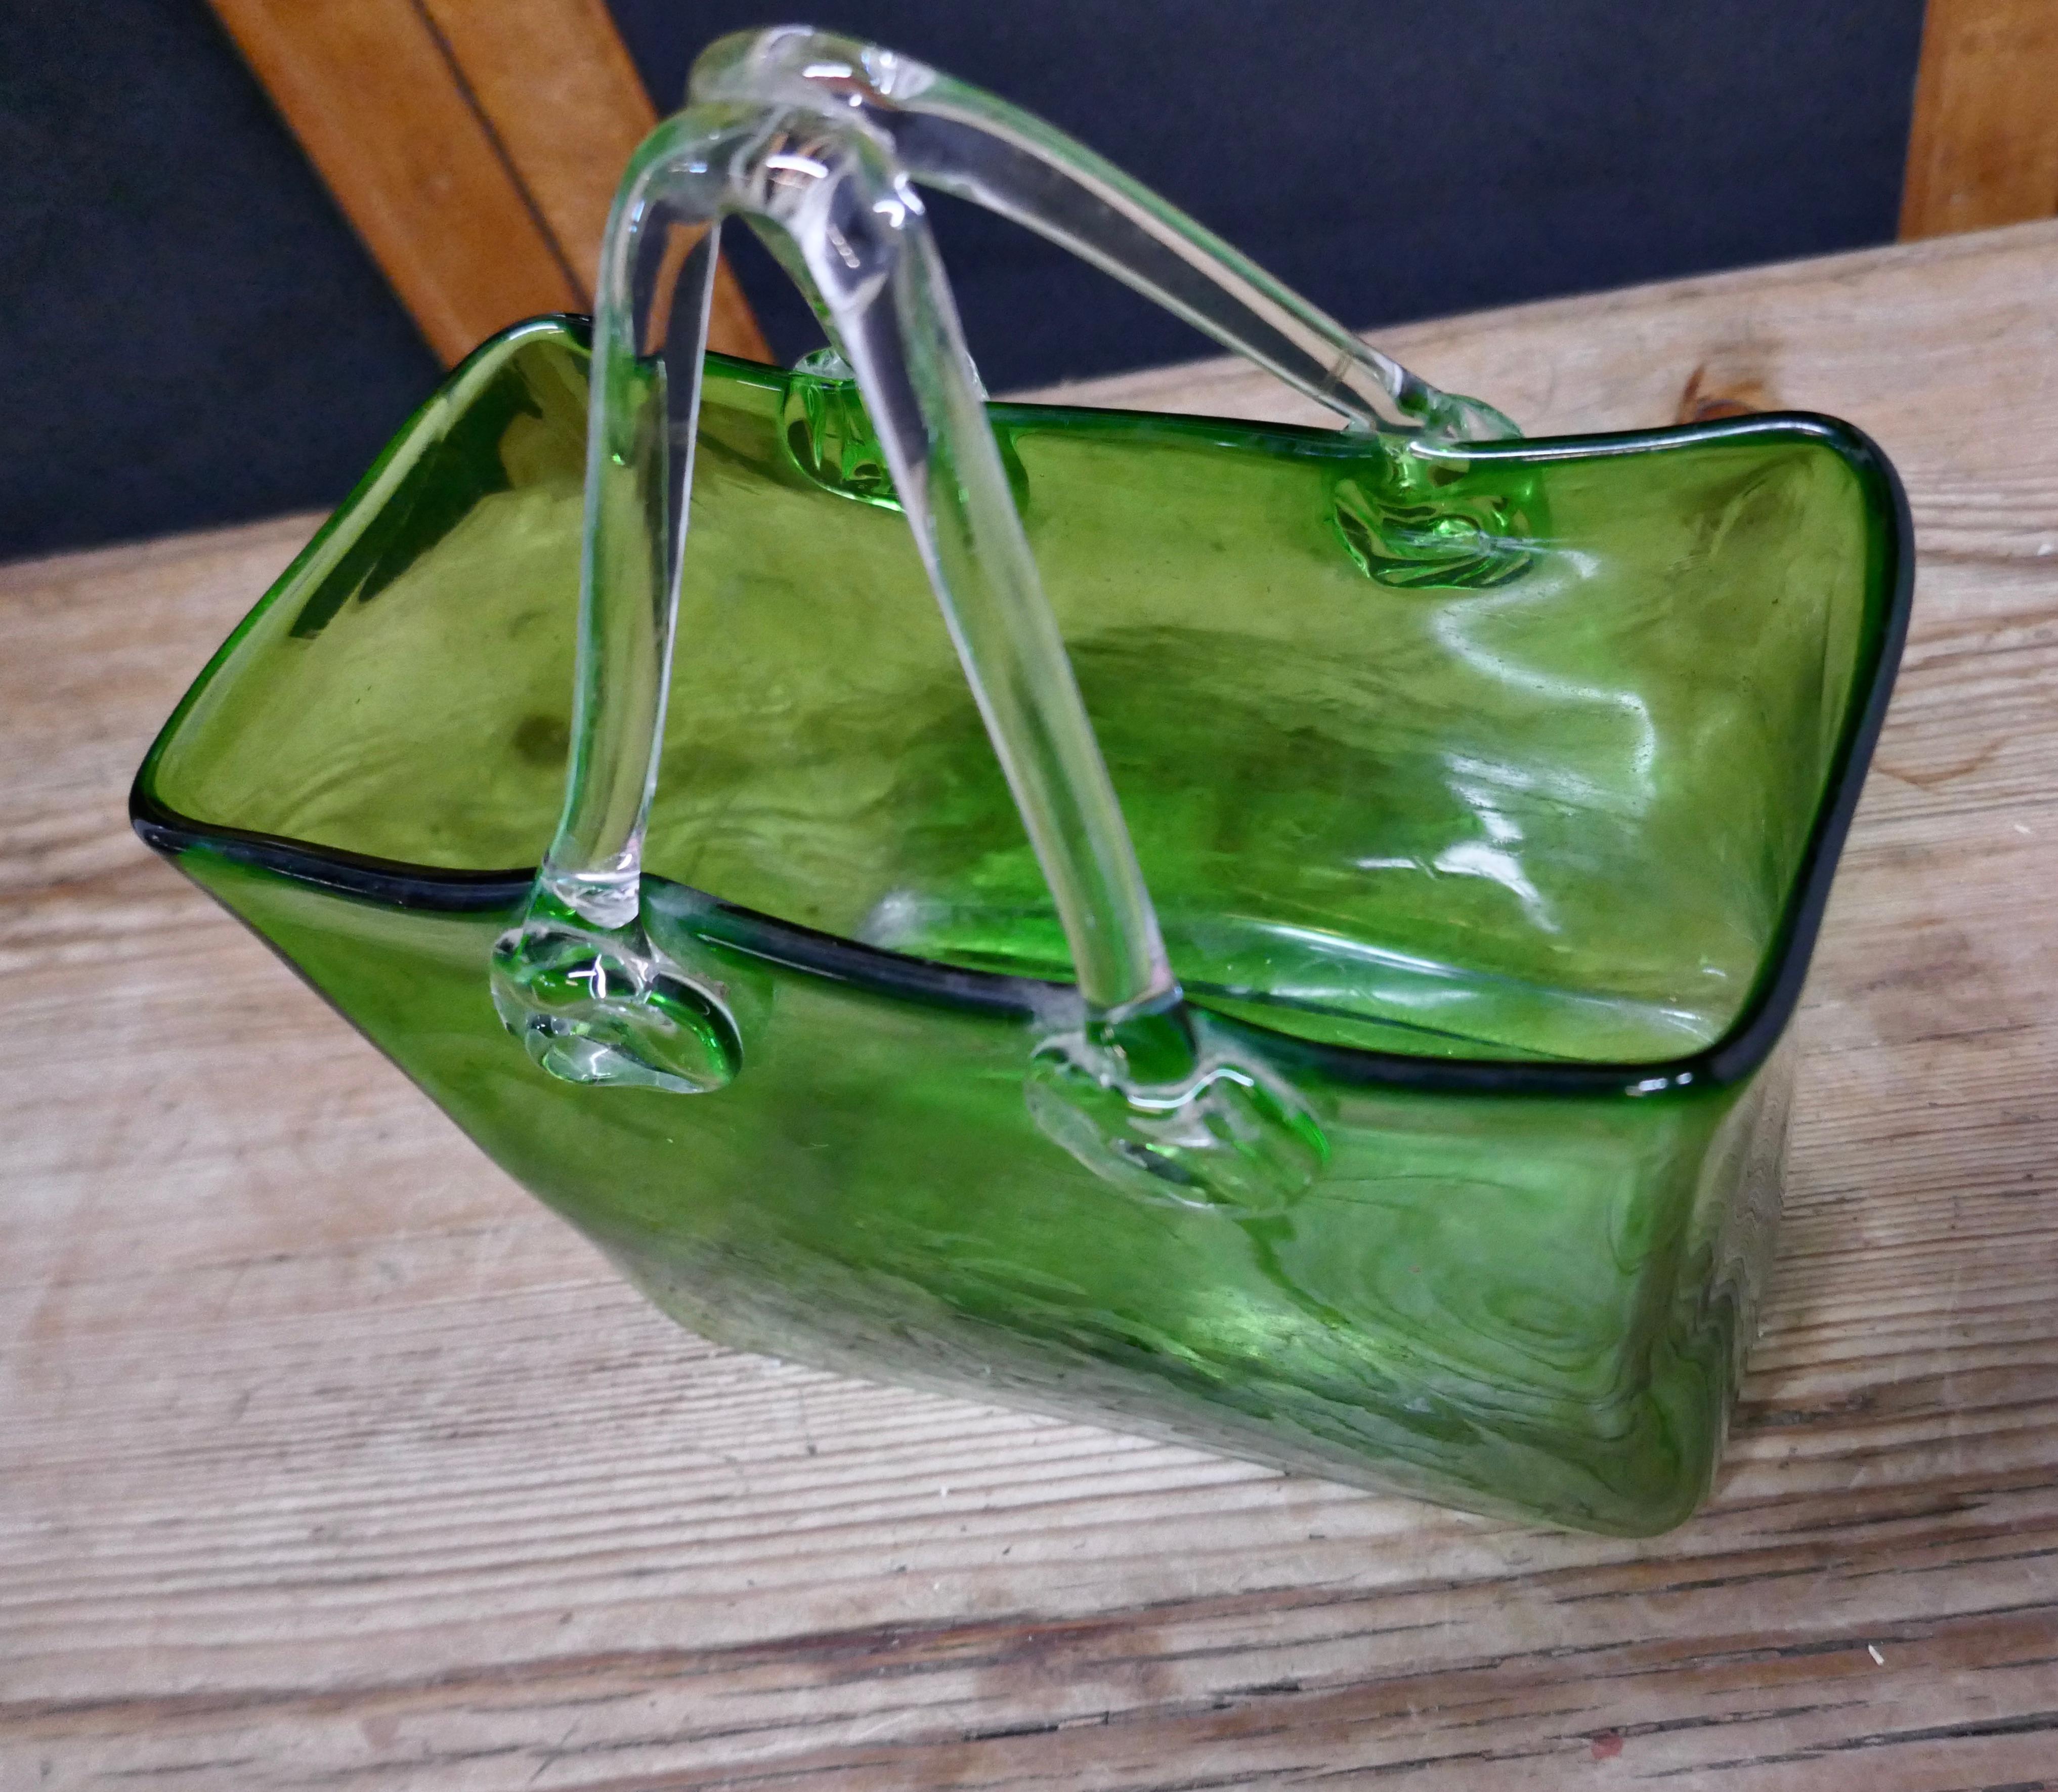 Quirky Art Deco hand blown green glass handbag vase.

A great bit of fun, this little hand bag, handmade in green glass with clear handles, originally a vase but with a modern twist and the addition of some fairy lights can be changed into a very